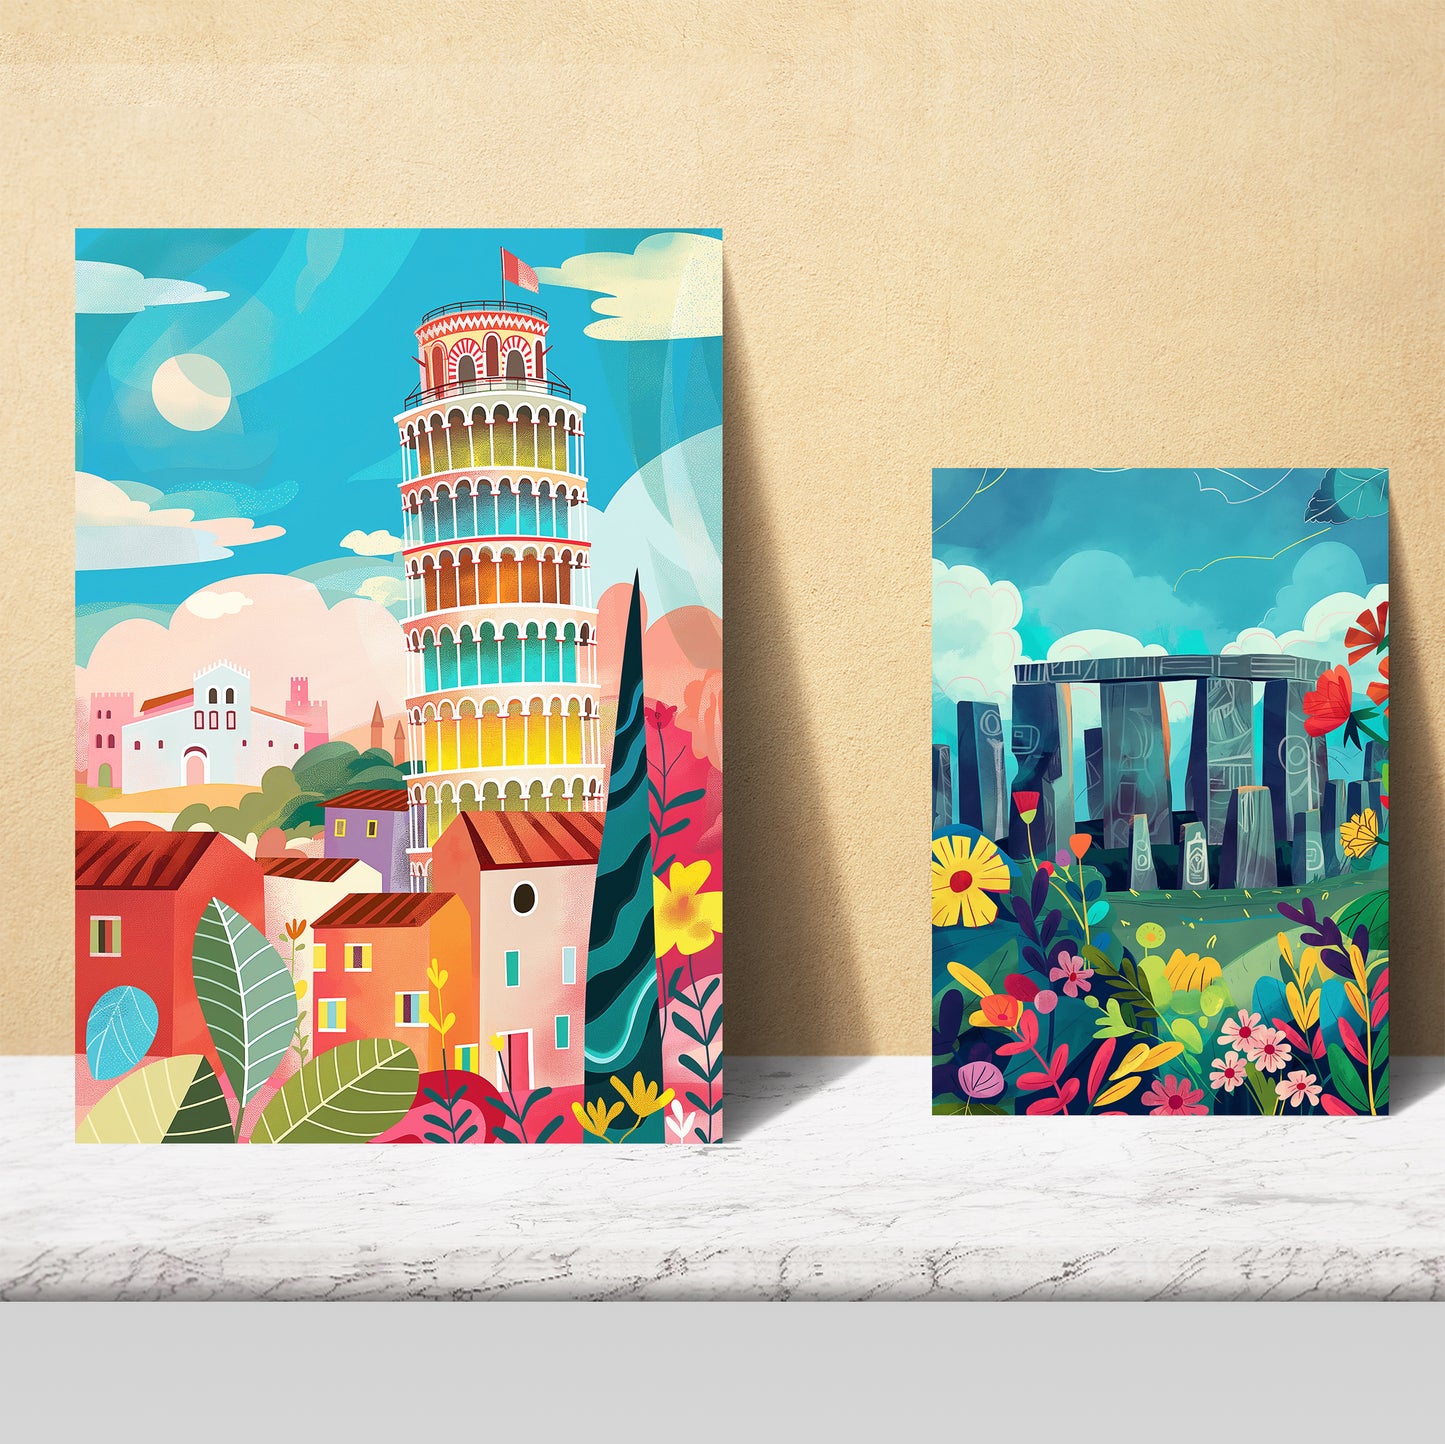 Monuments inspired by Mary Blair. Eiffel,Coliseo, Pisa, Golgen Gate, Stonehenge, Empire State